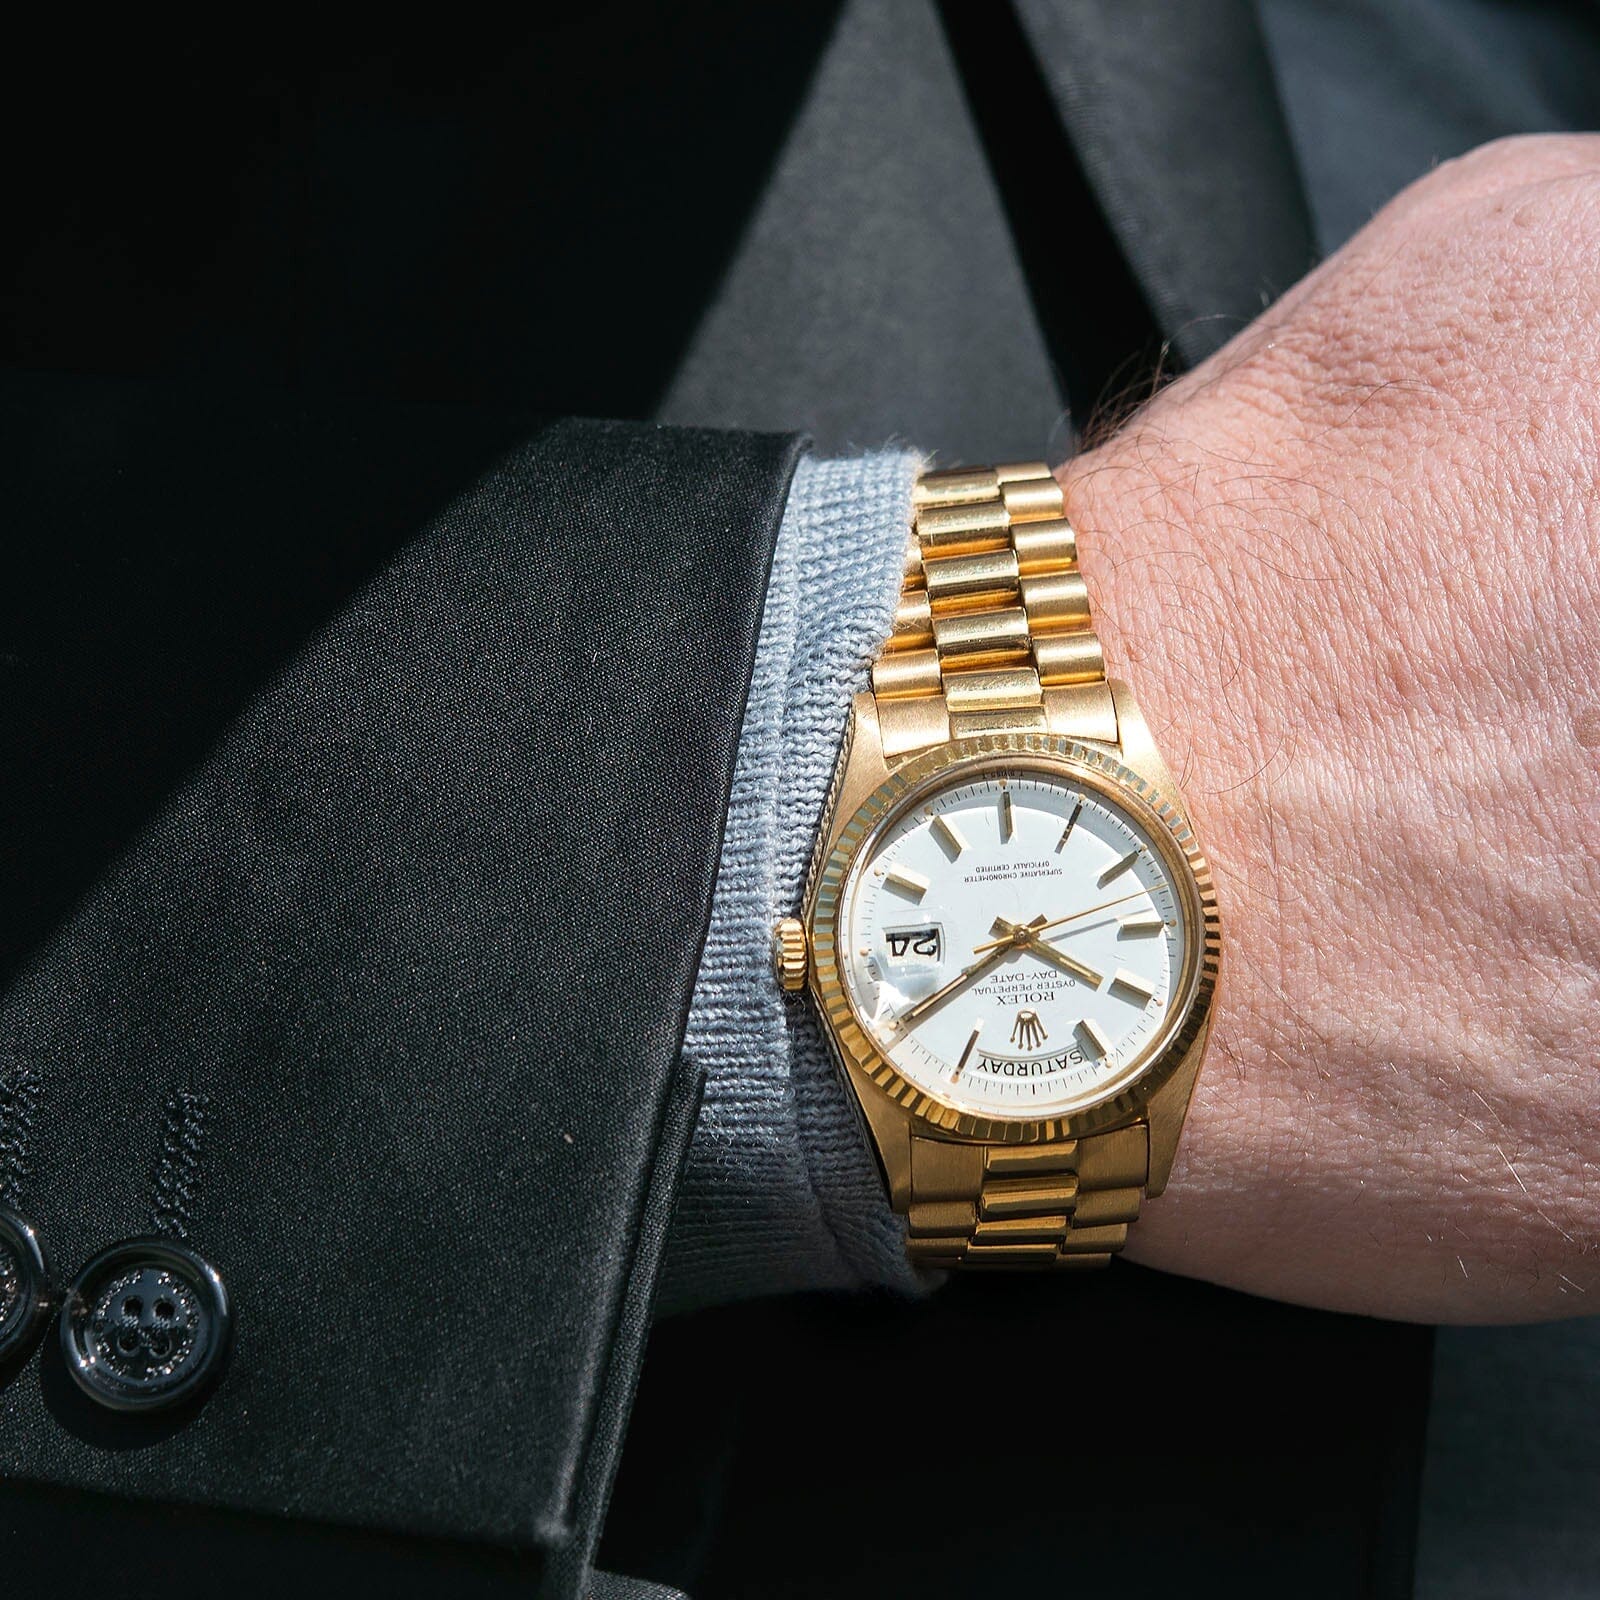 The Rolex Day-Date - King of Versatility